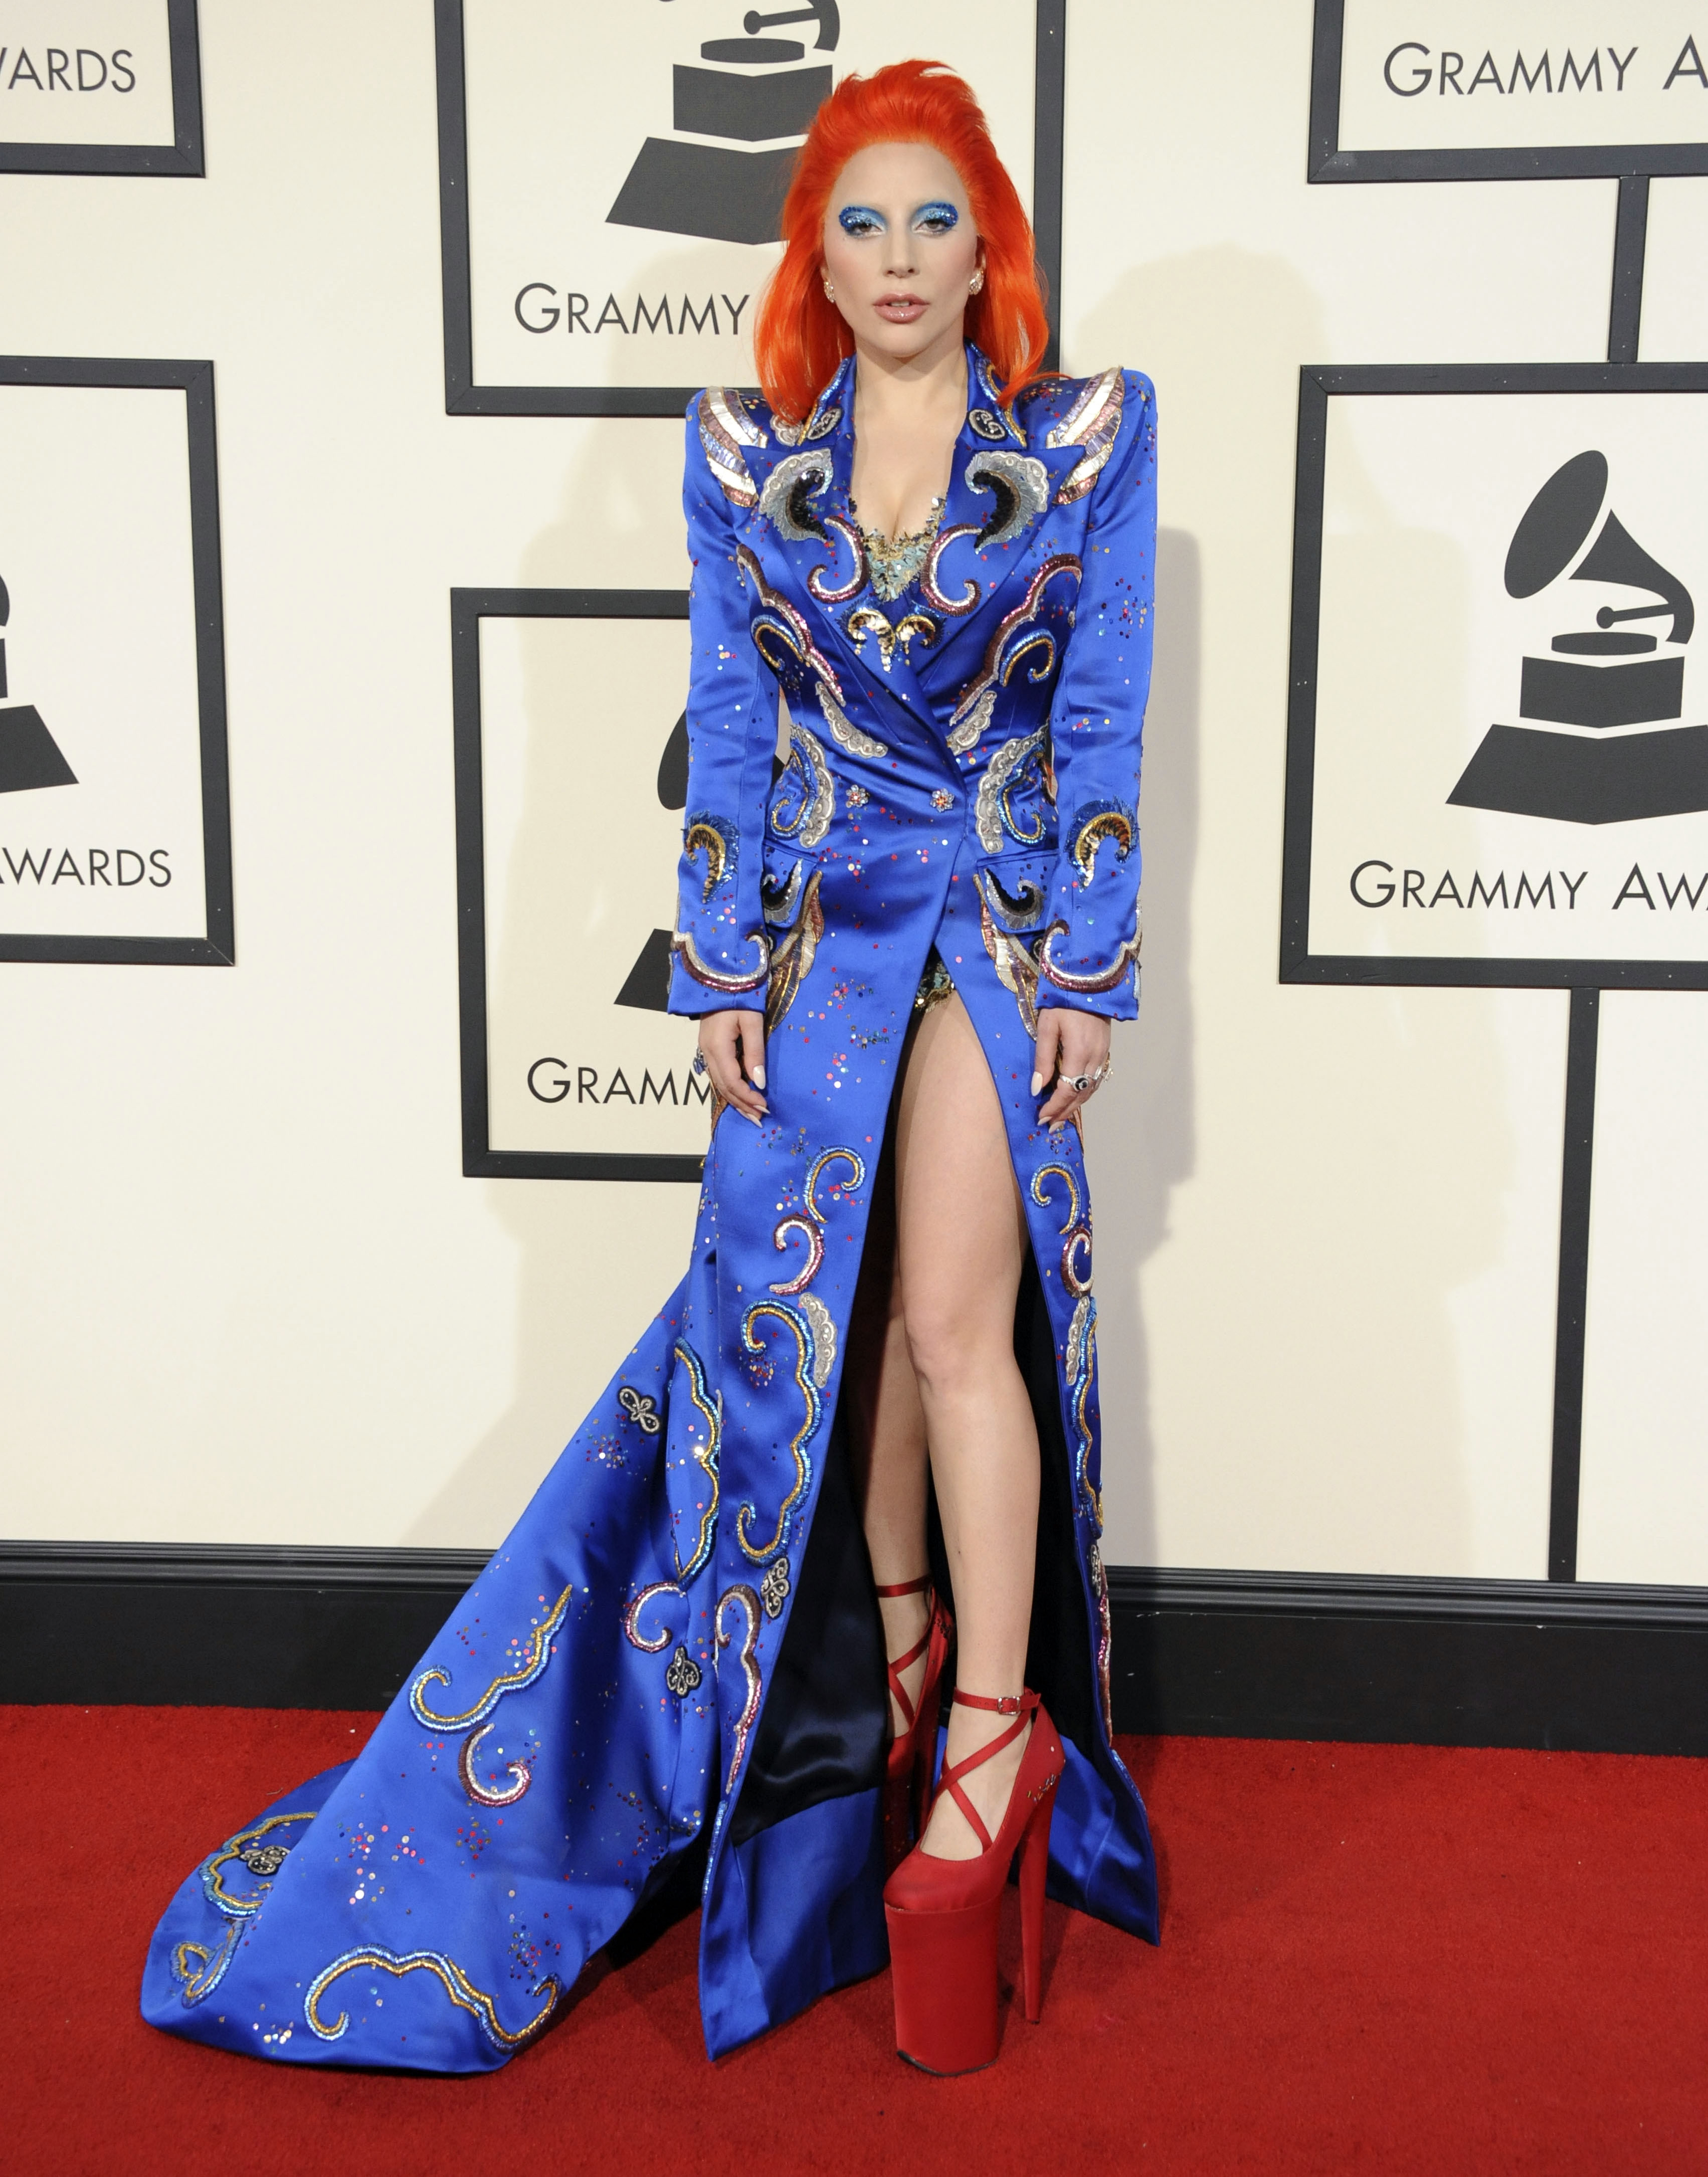 Grammys Fugs and Fabs: Lady Gaga